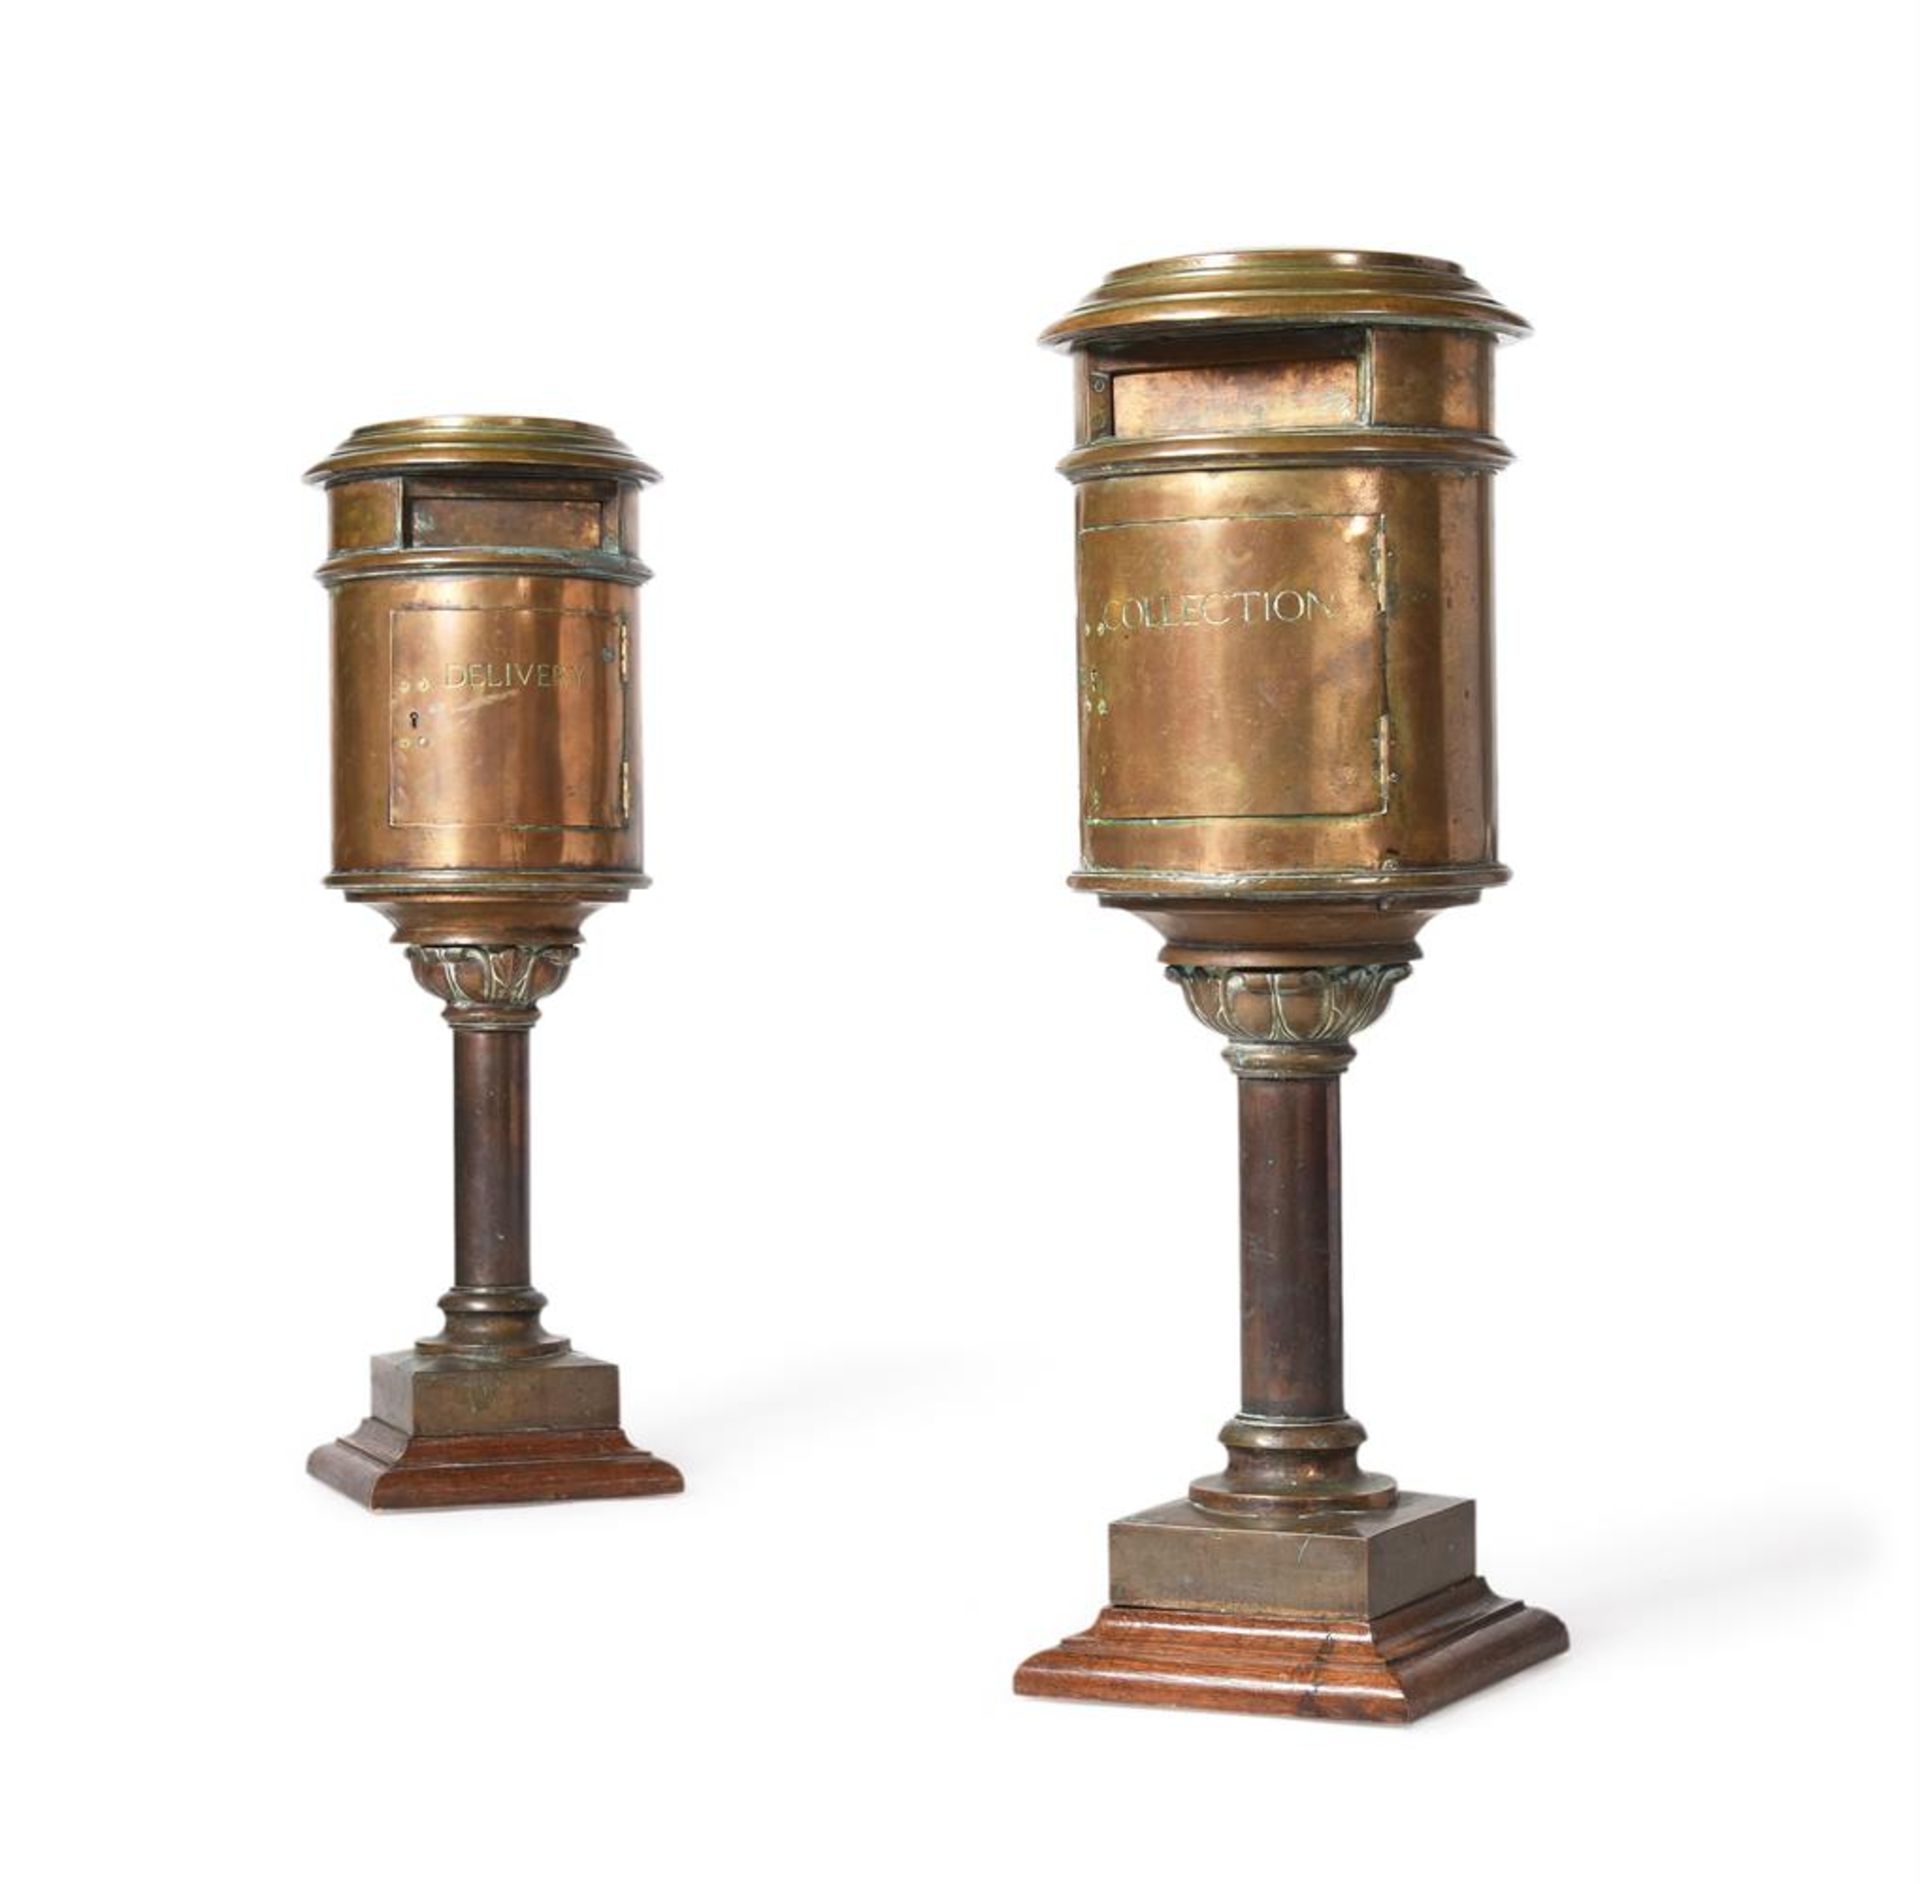 AN UNUSUAL PAIR OF BRASS AND OAK HOTEL OR COUNTRY HOUSE POST BOXES, EARLY 20TH CENTURY